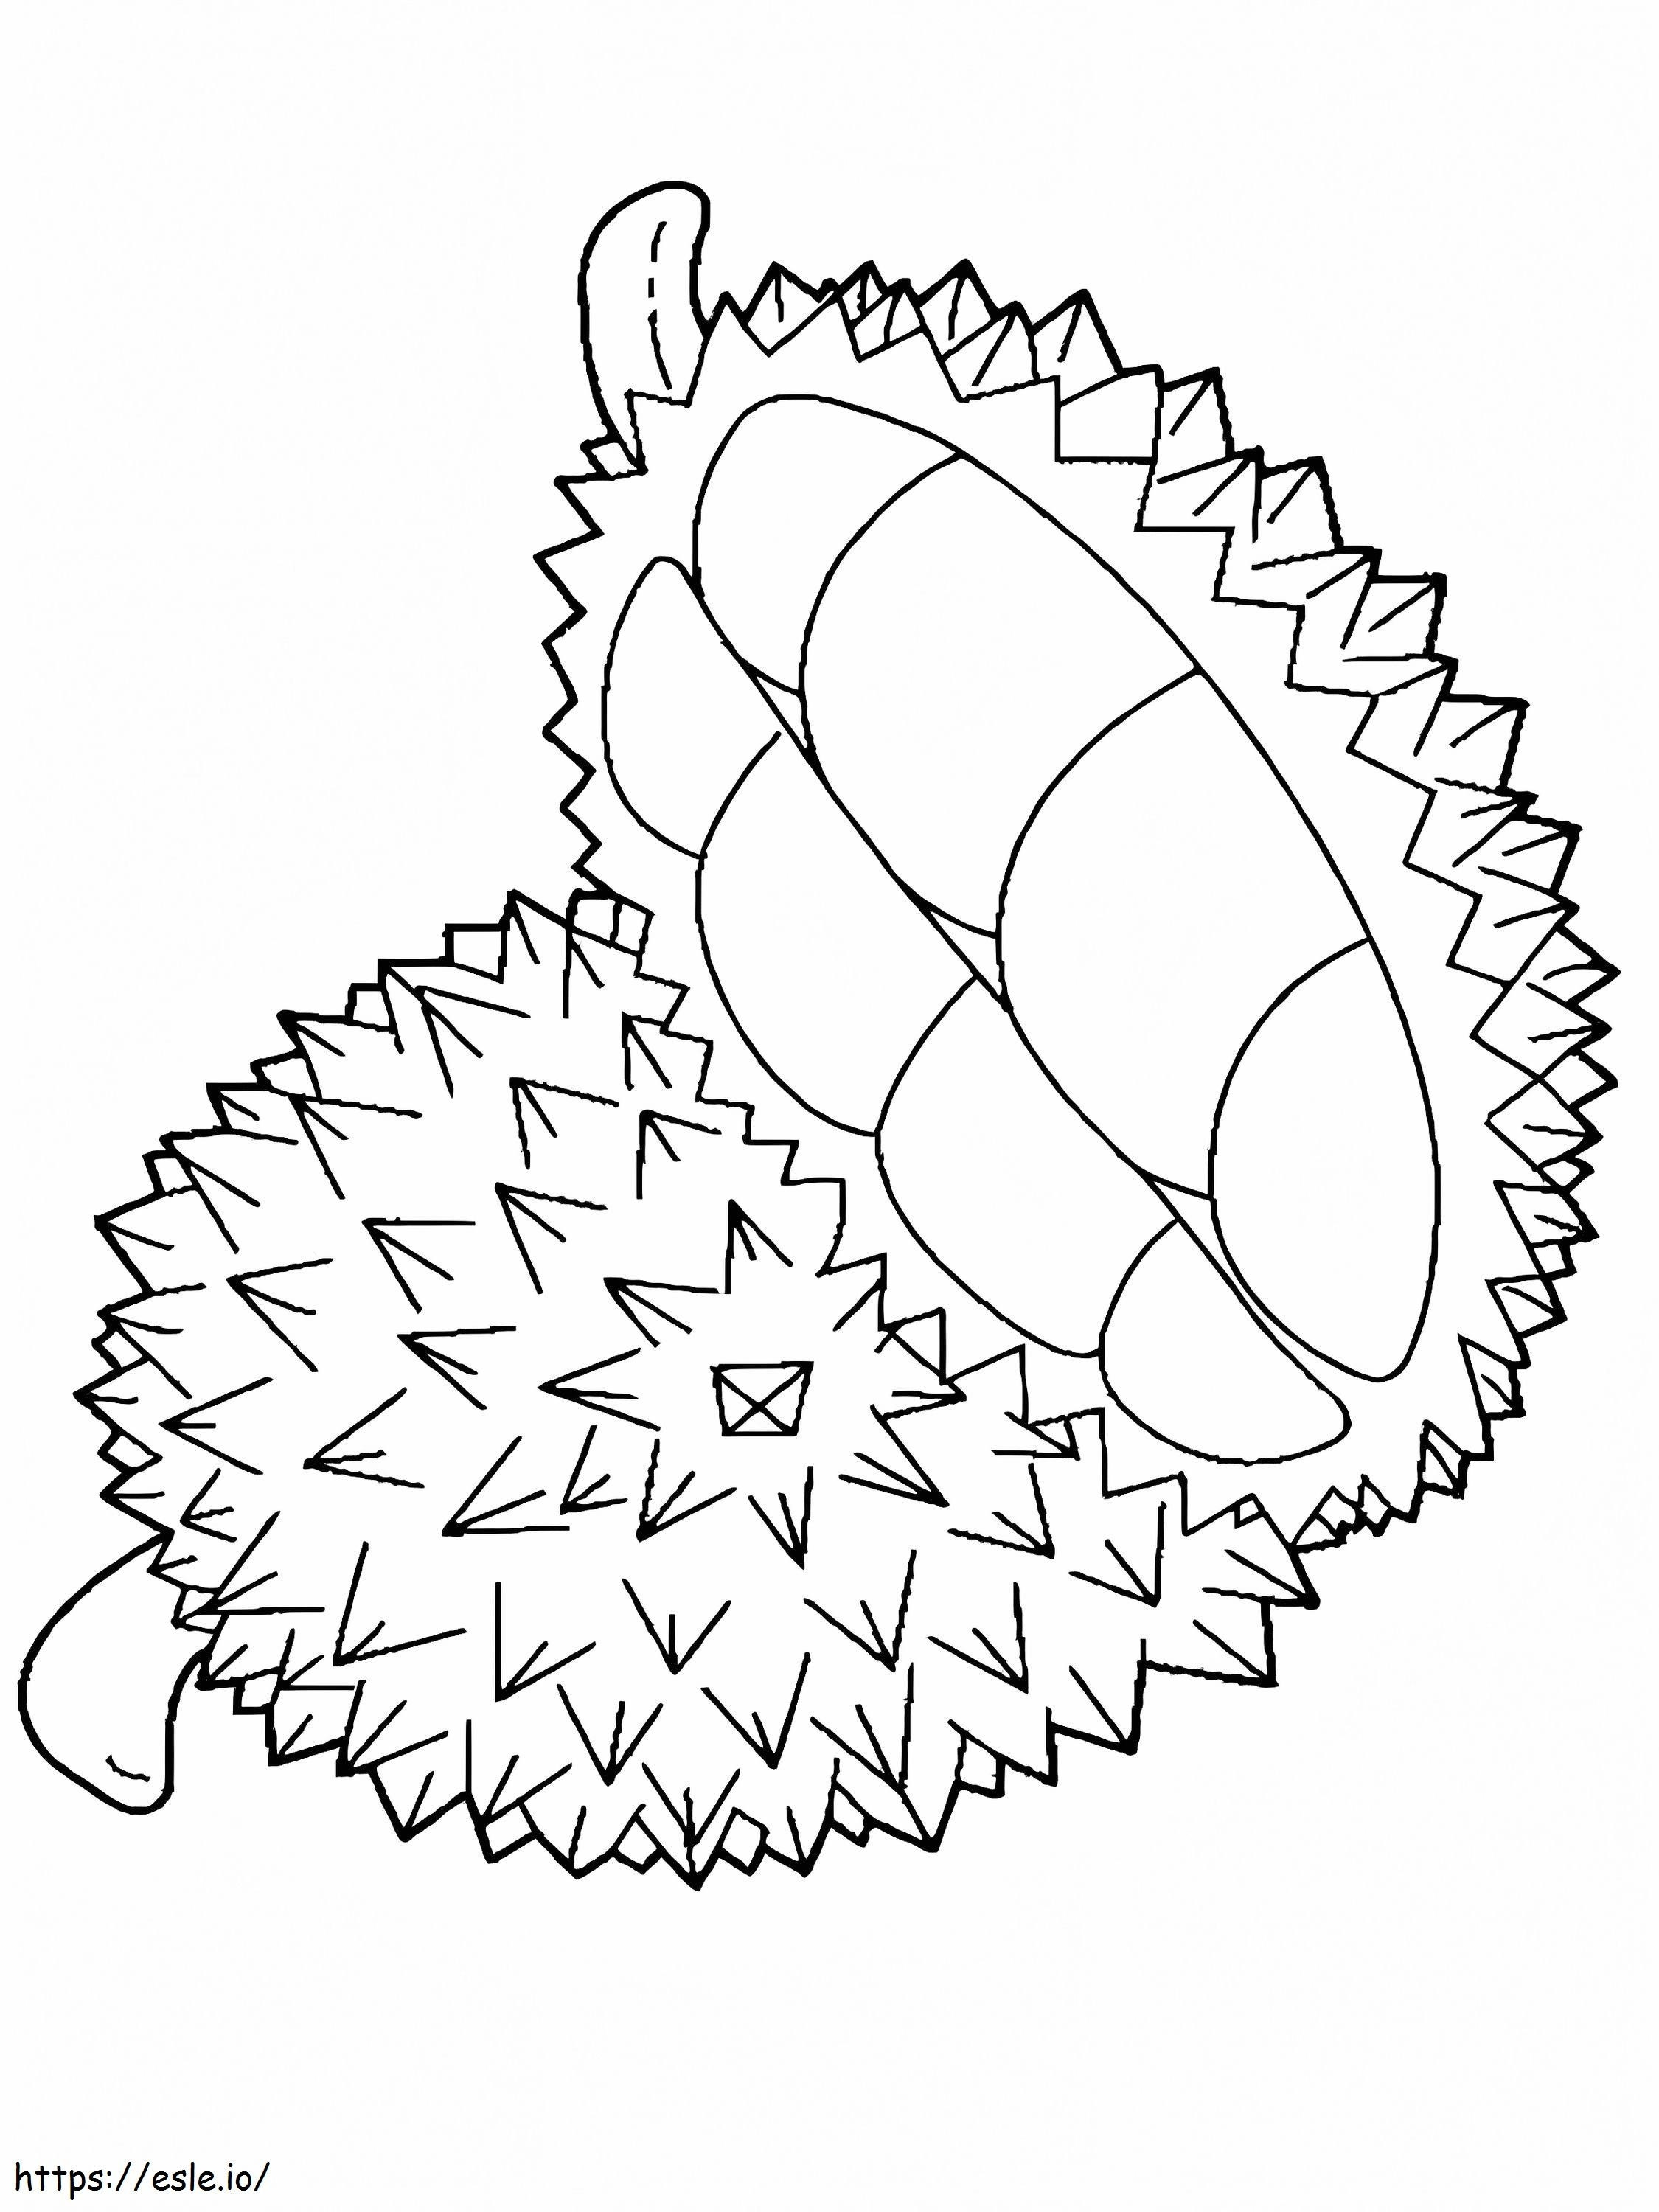 Basic A Durian And Half Durian coloring page